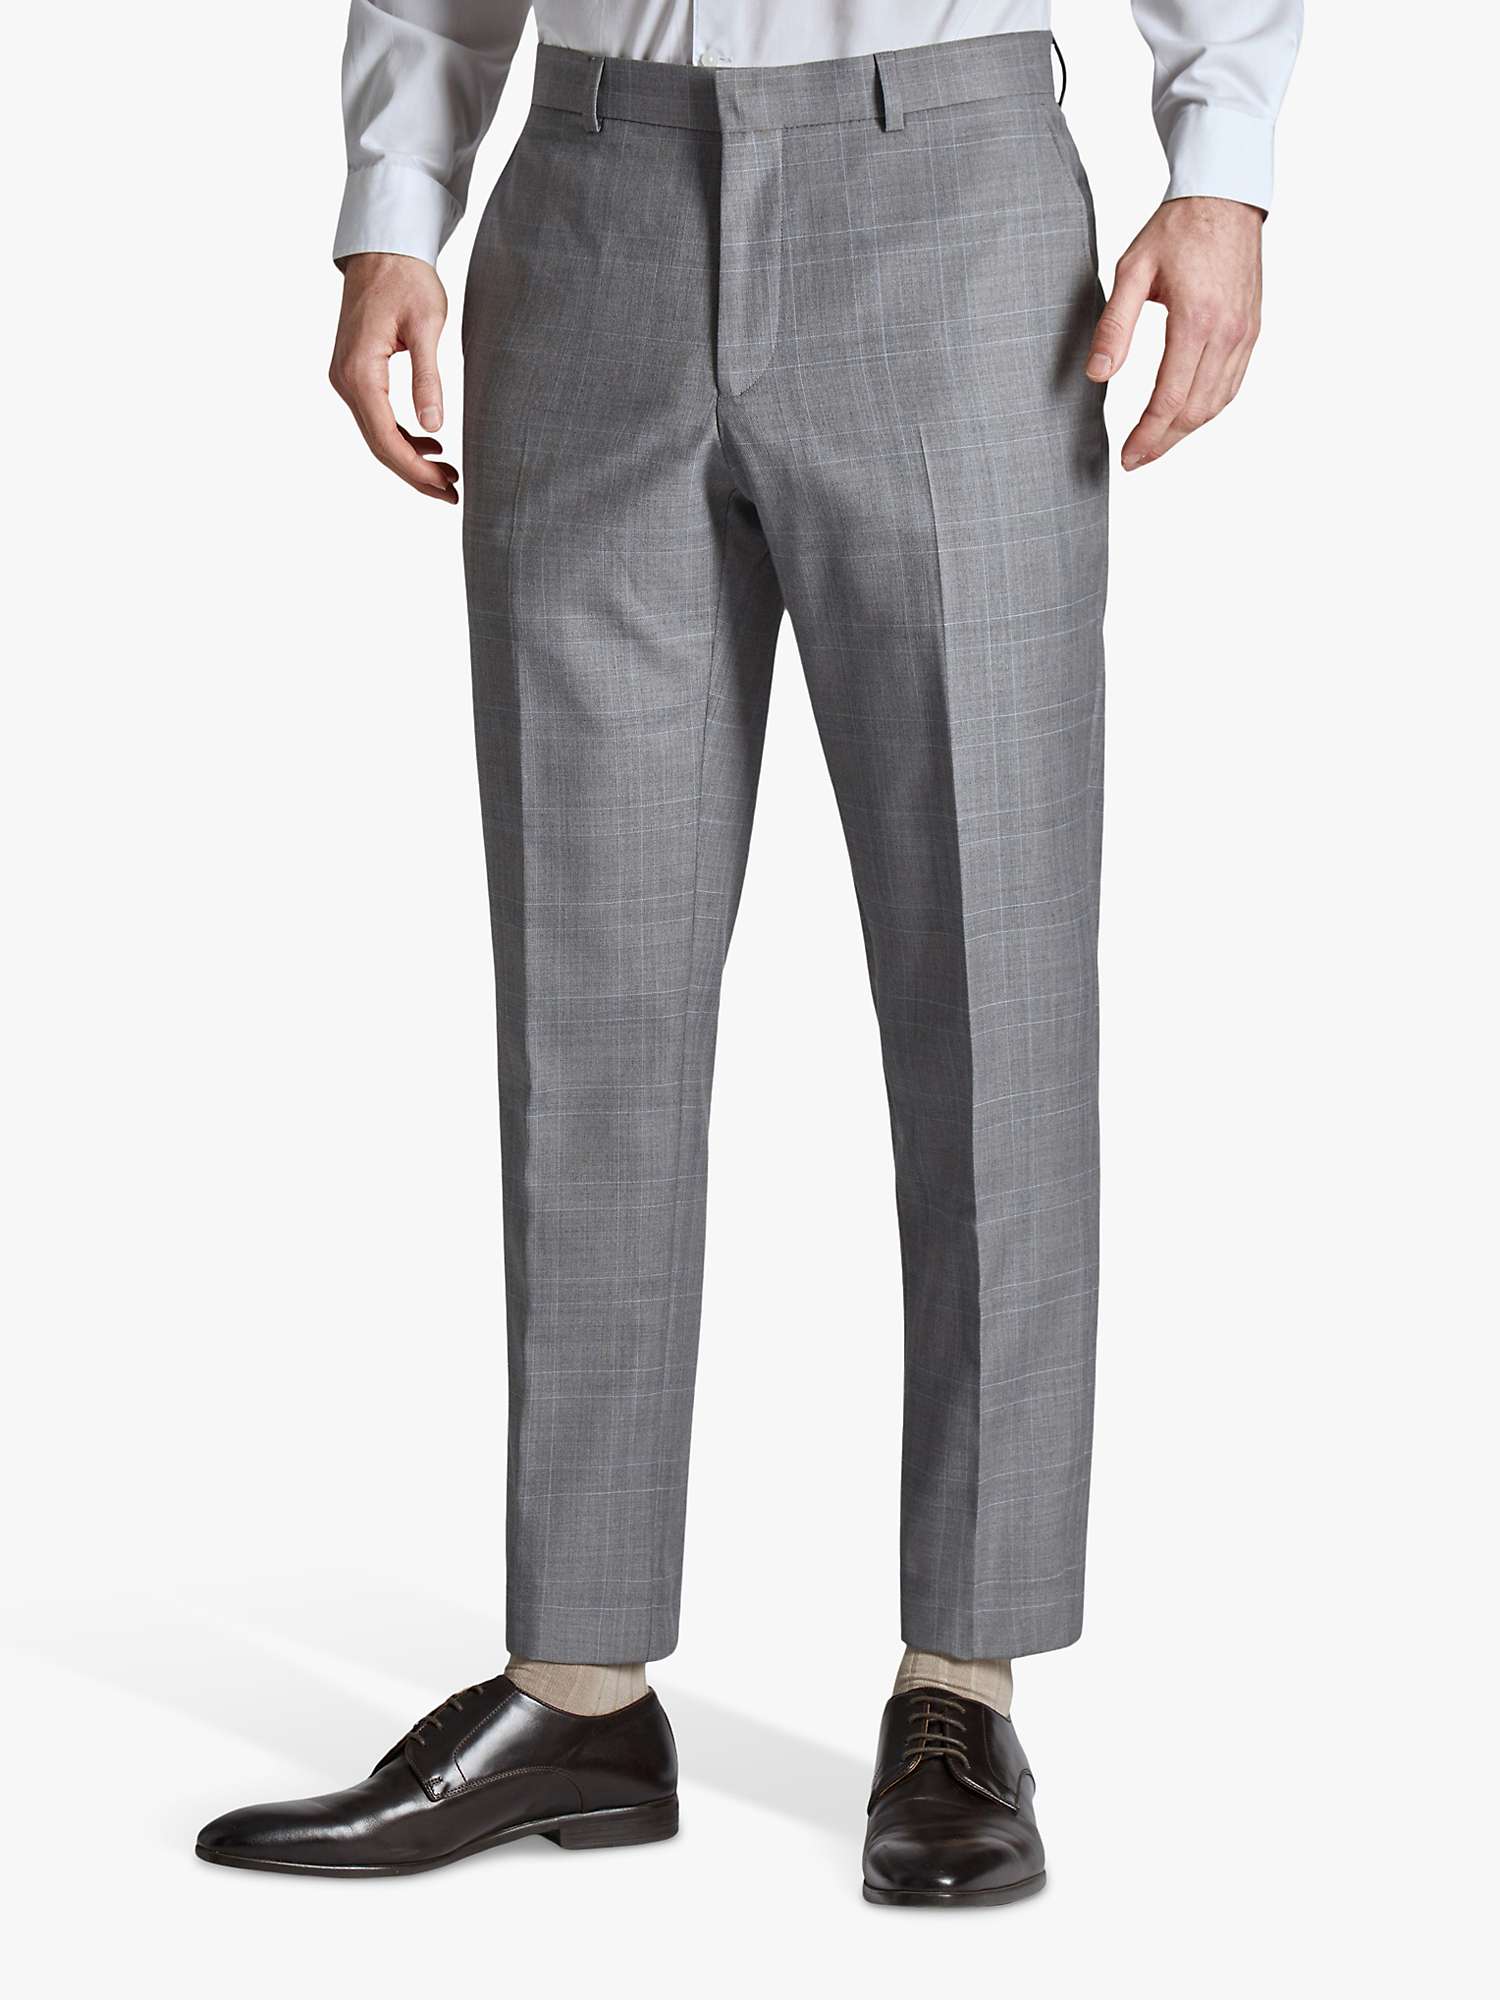 Buy Ted Baker Soft Check Slim Fit Wool Blend Trousers, Grey Online at johnlewis.com